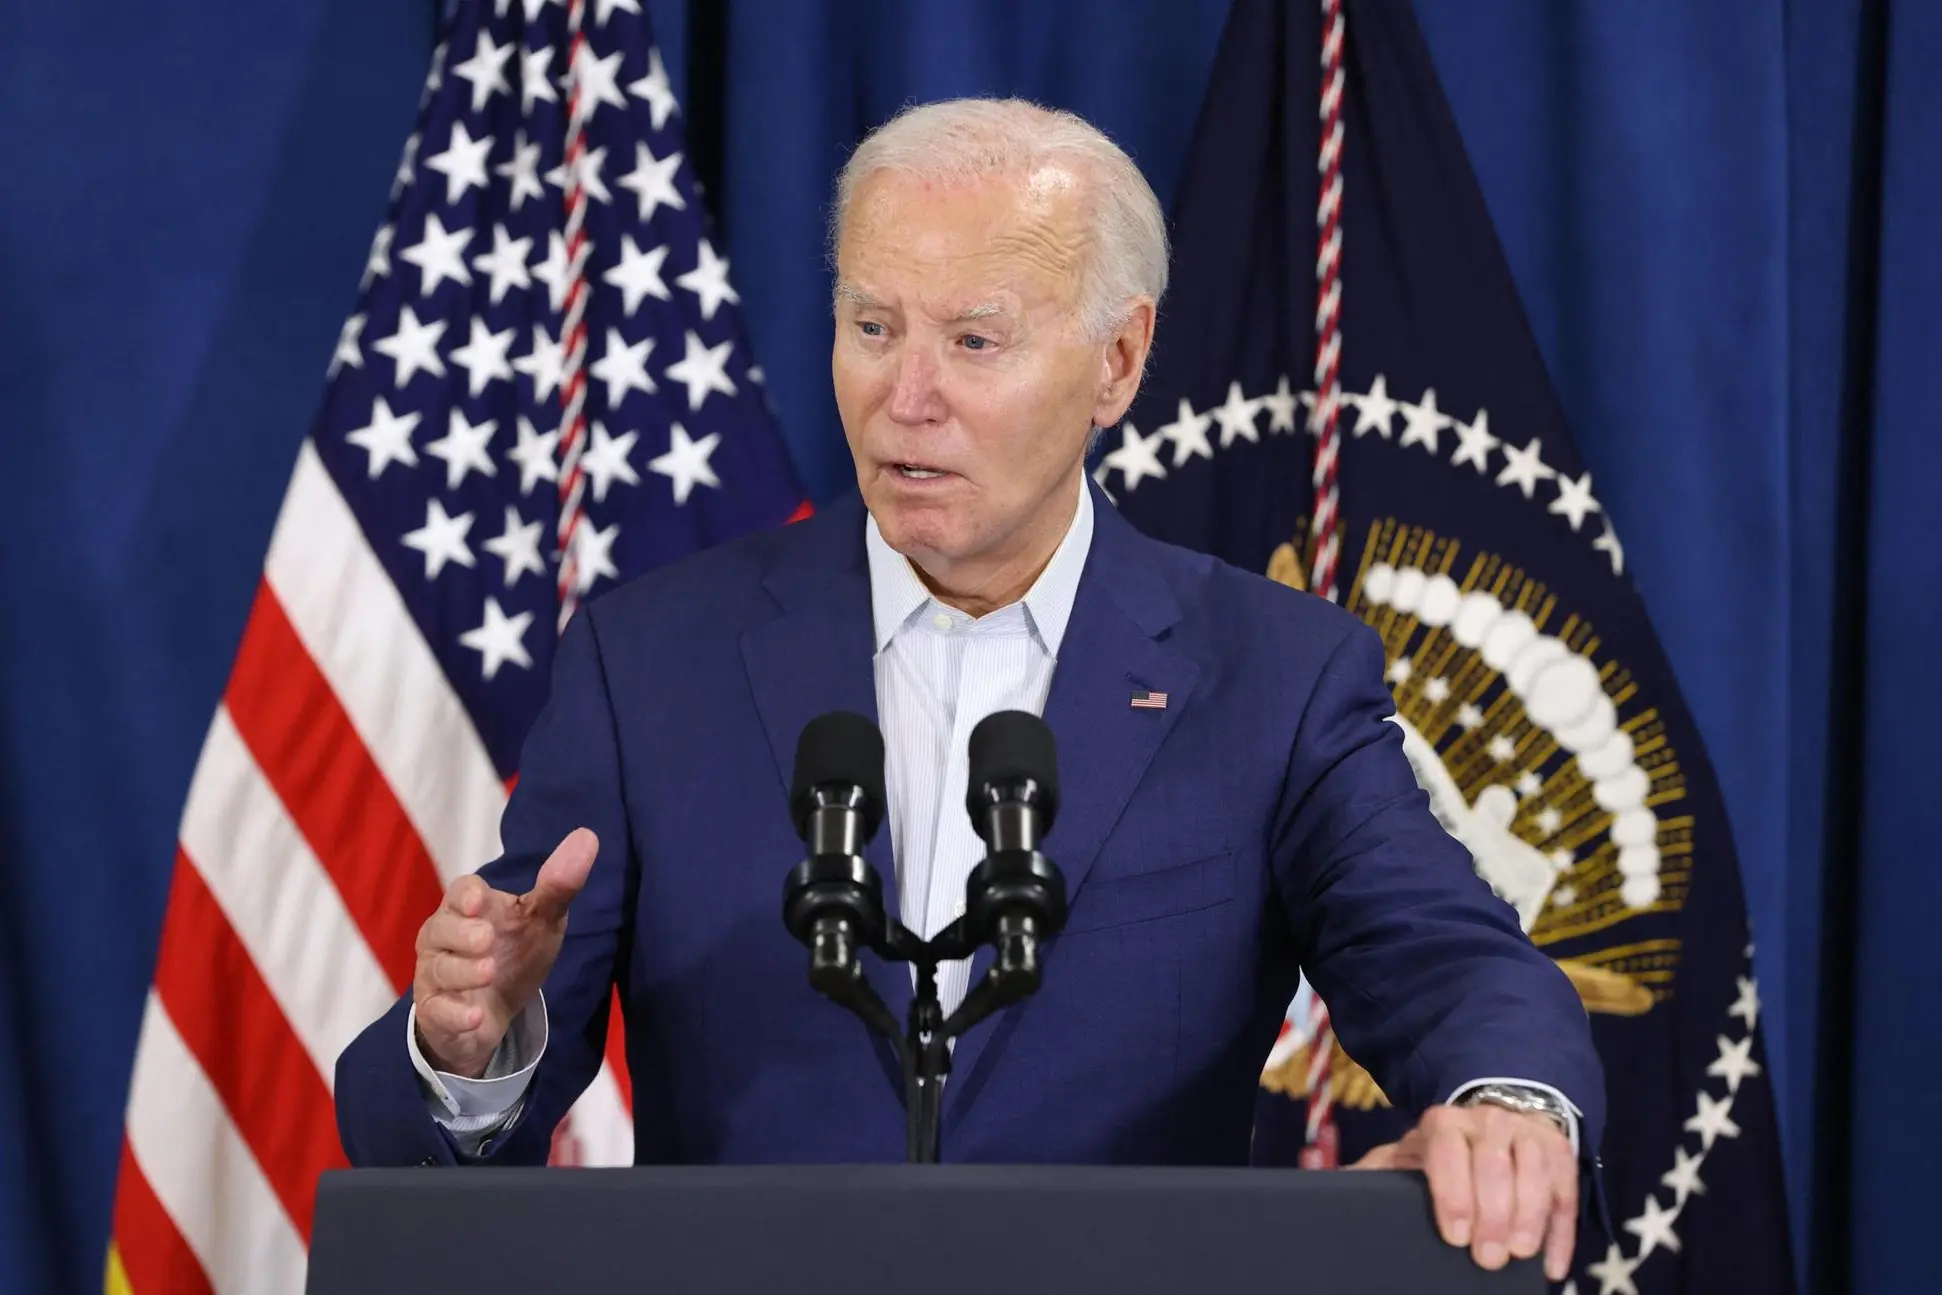 TOPSHOT - US President Joe Biden speaks after his Republican opponent Donald Trump was injured following a shooting at an election rally in Pennsylvania, at the Rehoboth Beach Police Department, in Rehoboth Beach, Delaware, July 13, 2024. US President Joe Biden led the condemnation after his election rival Donald Trump was wounded in a shooting incident at a rally in Pennsylvania July 13 that also reportedly killed at least one bystander. Political leaders on both sides of the aisle slammed the violence minutes after the Republican candidate was rushed off stage by the Secret Service, blood running down his face. (Photo by SAMUEL CORUM / AFP)